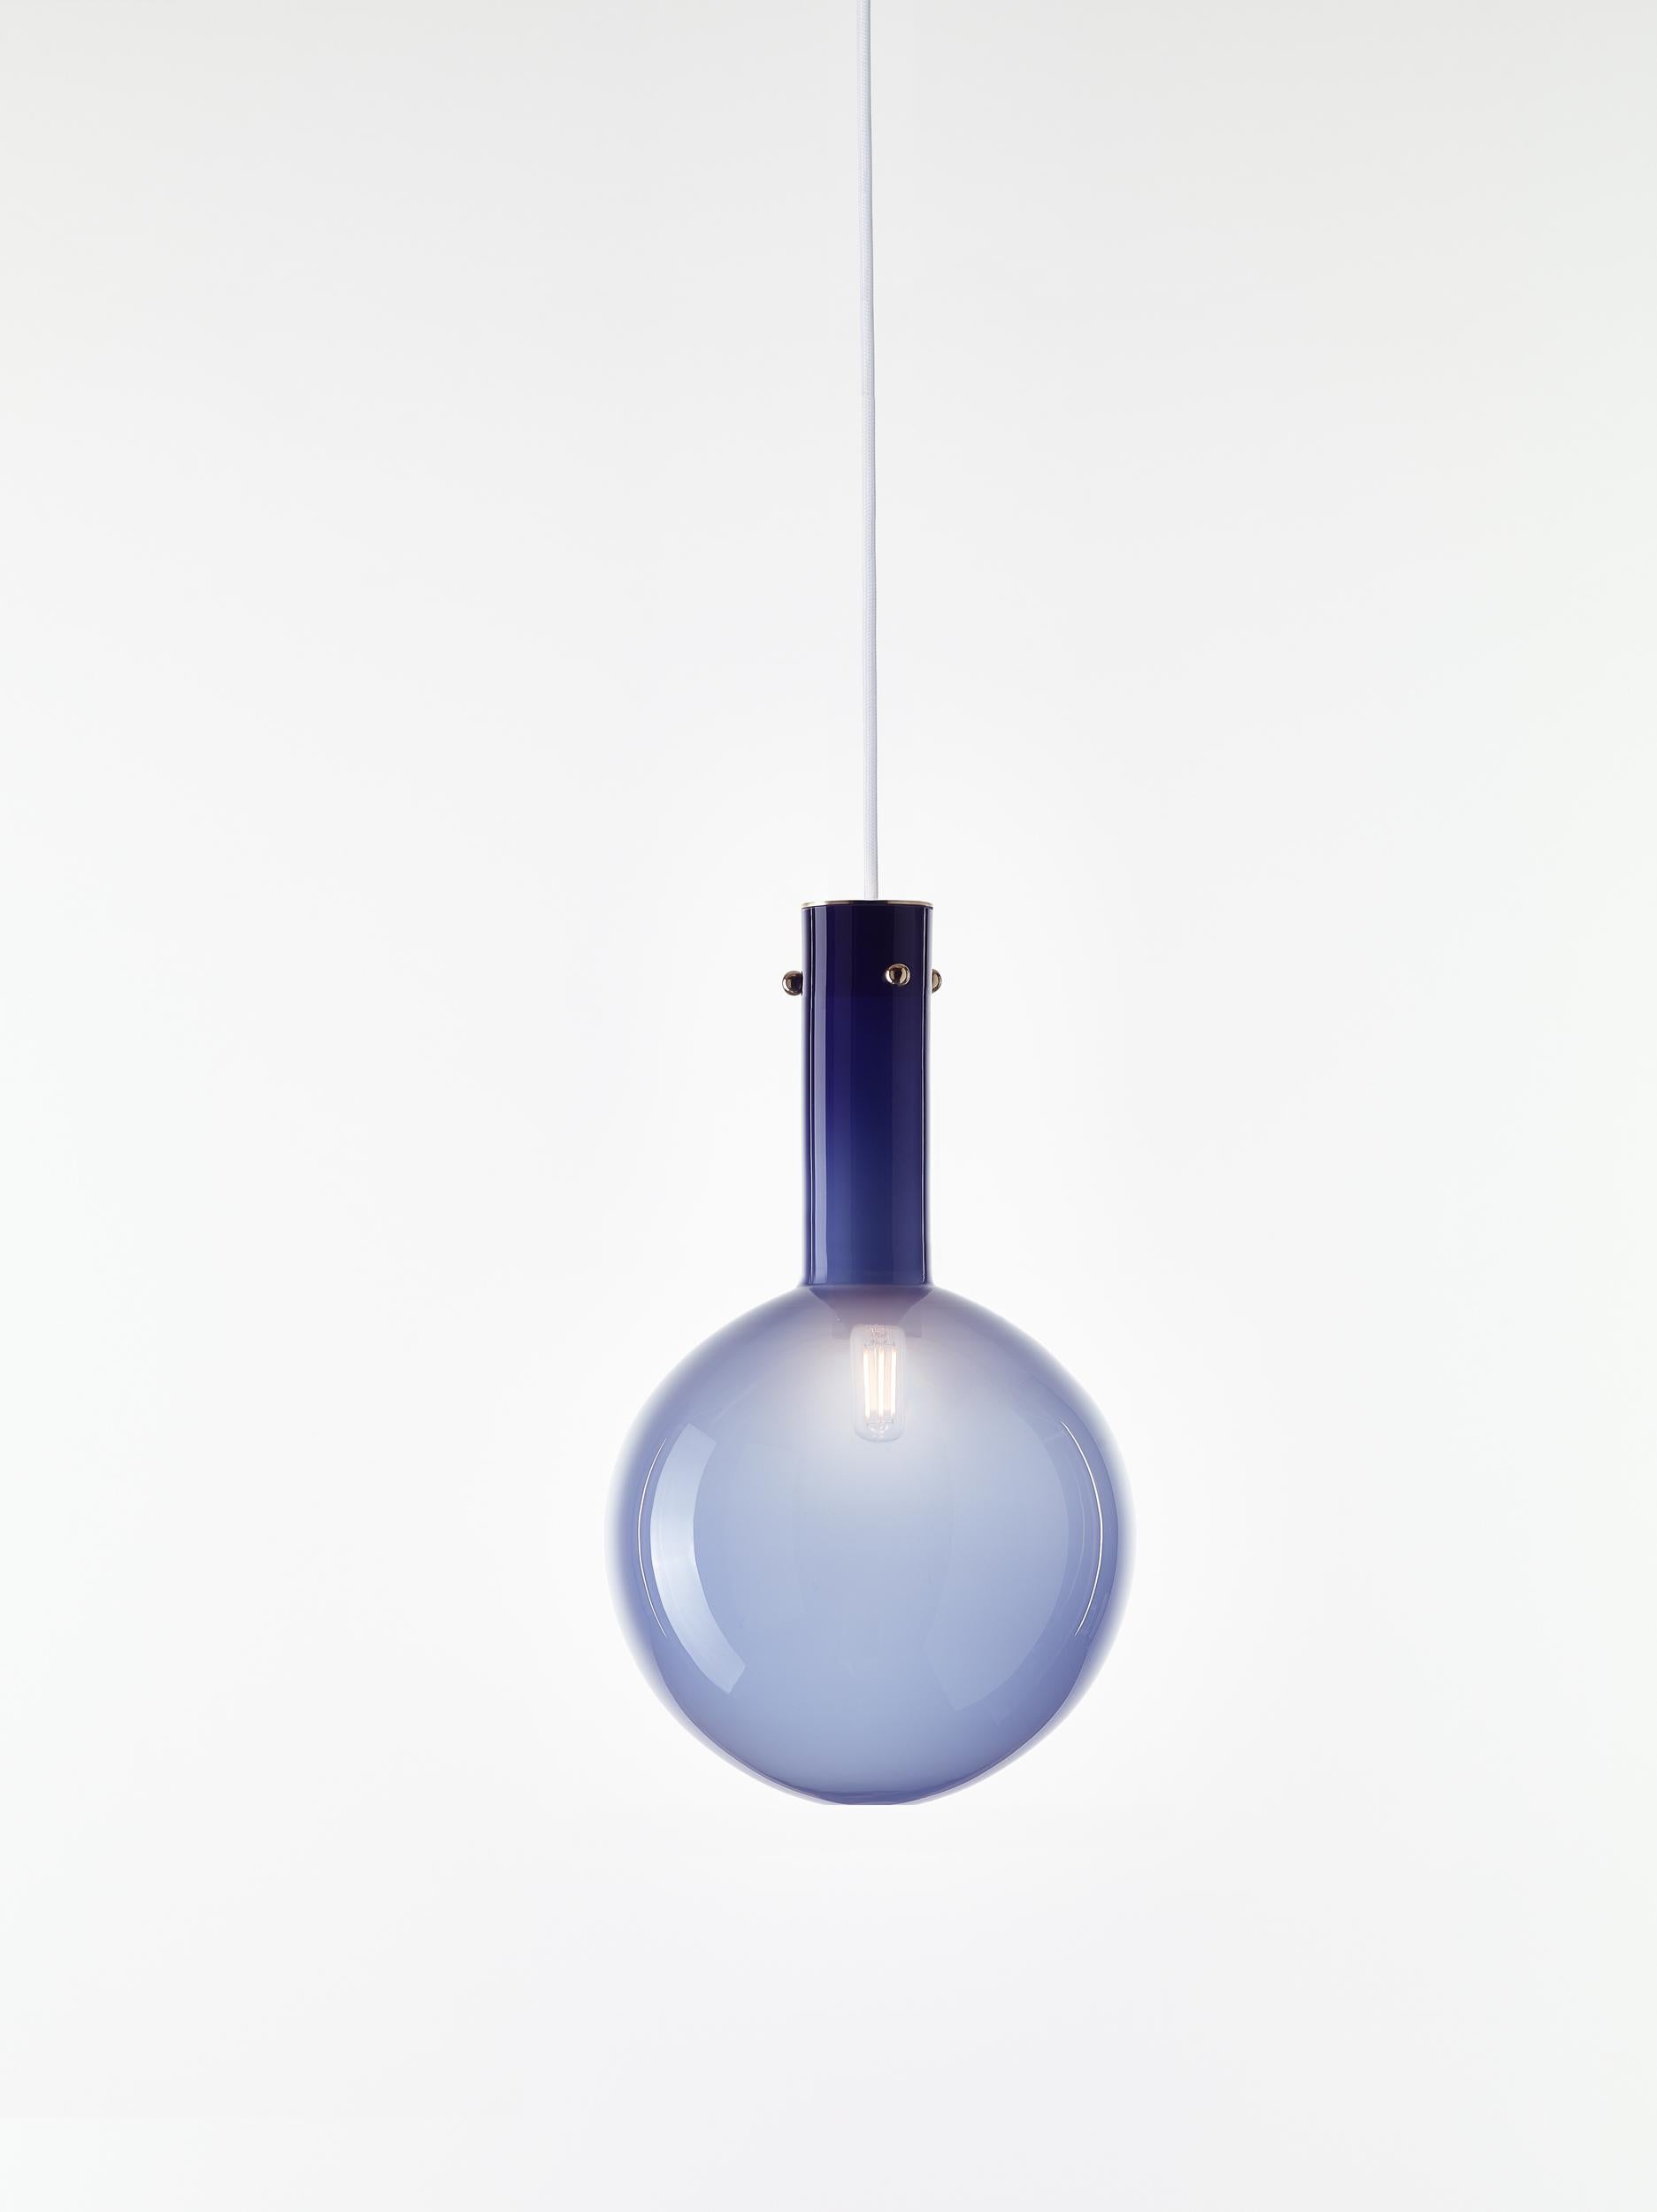 Blue Sphaerae pendant light by Dechem Studio
Dimensions: D 20 x H 180 cm
Materials: brass, metal, glass.
Also available: different finishes and colours available.

Only one homogenous piece of hand-blown glass creates the main body of Sphaerae